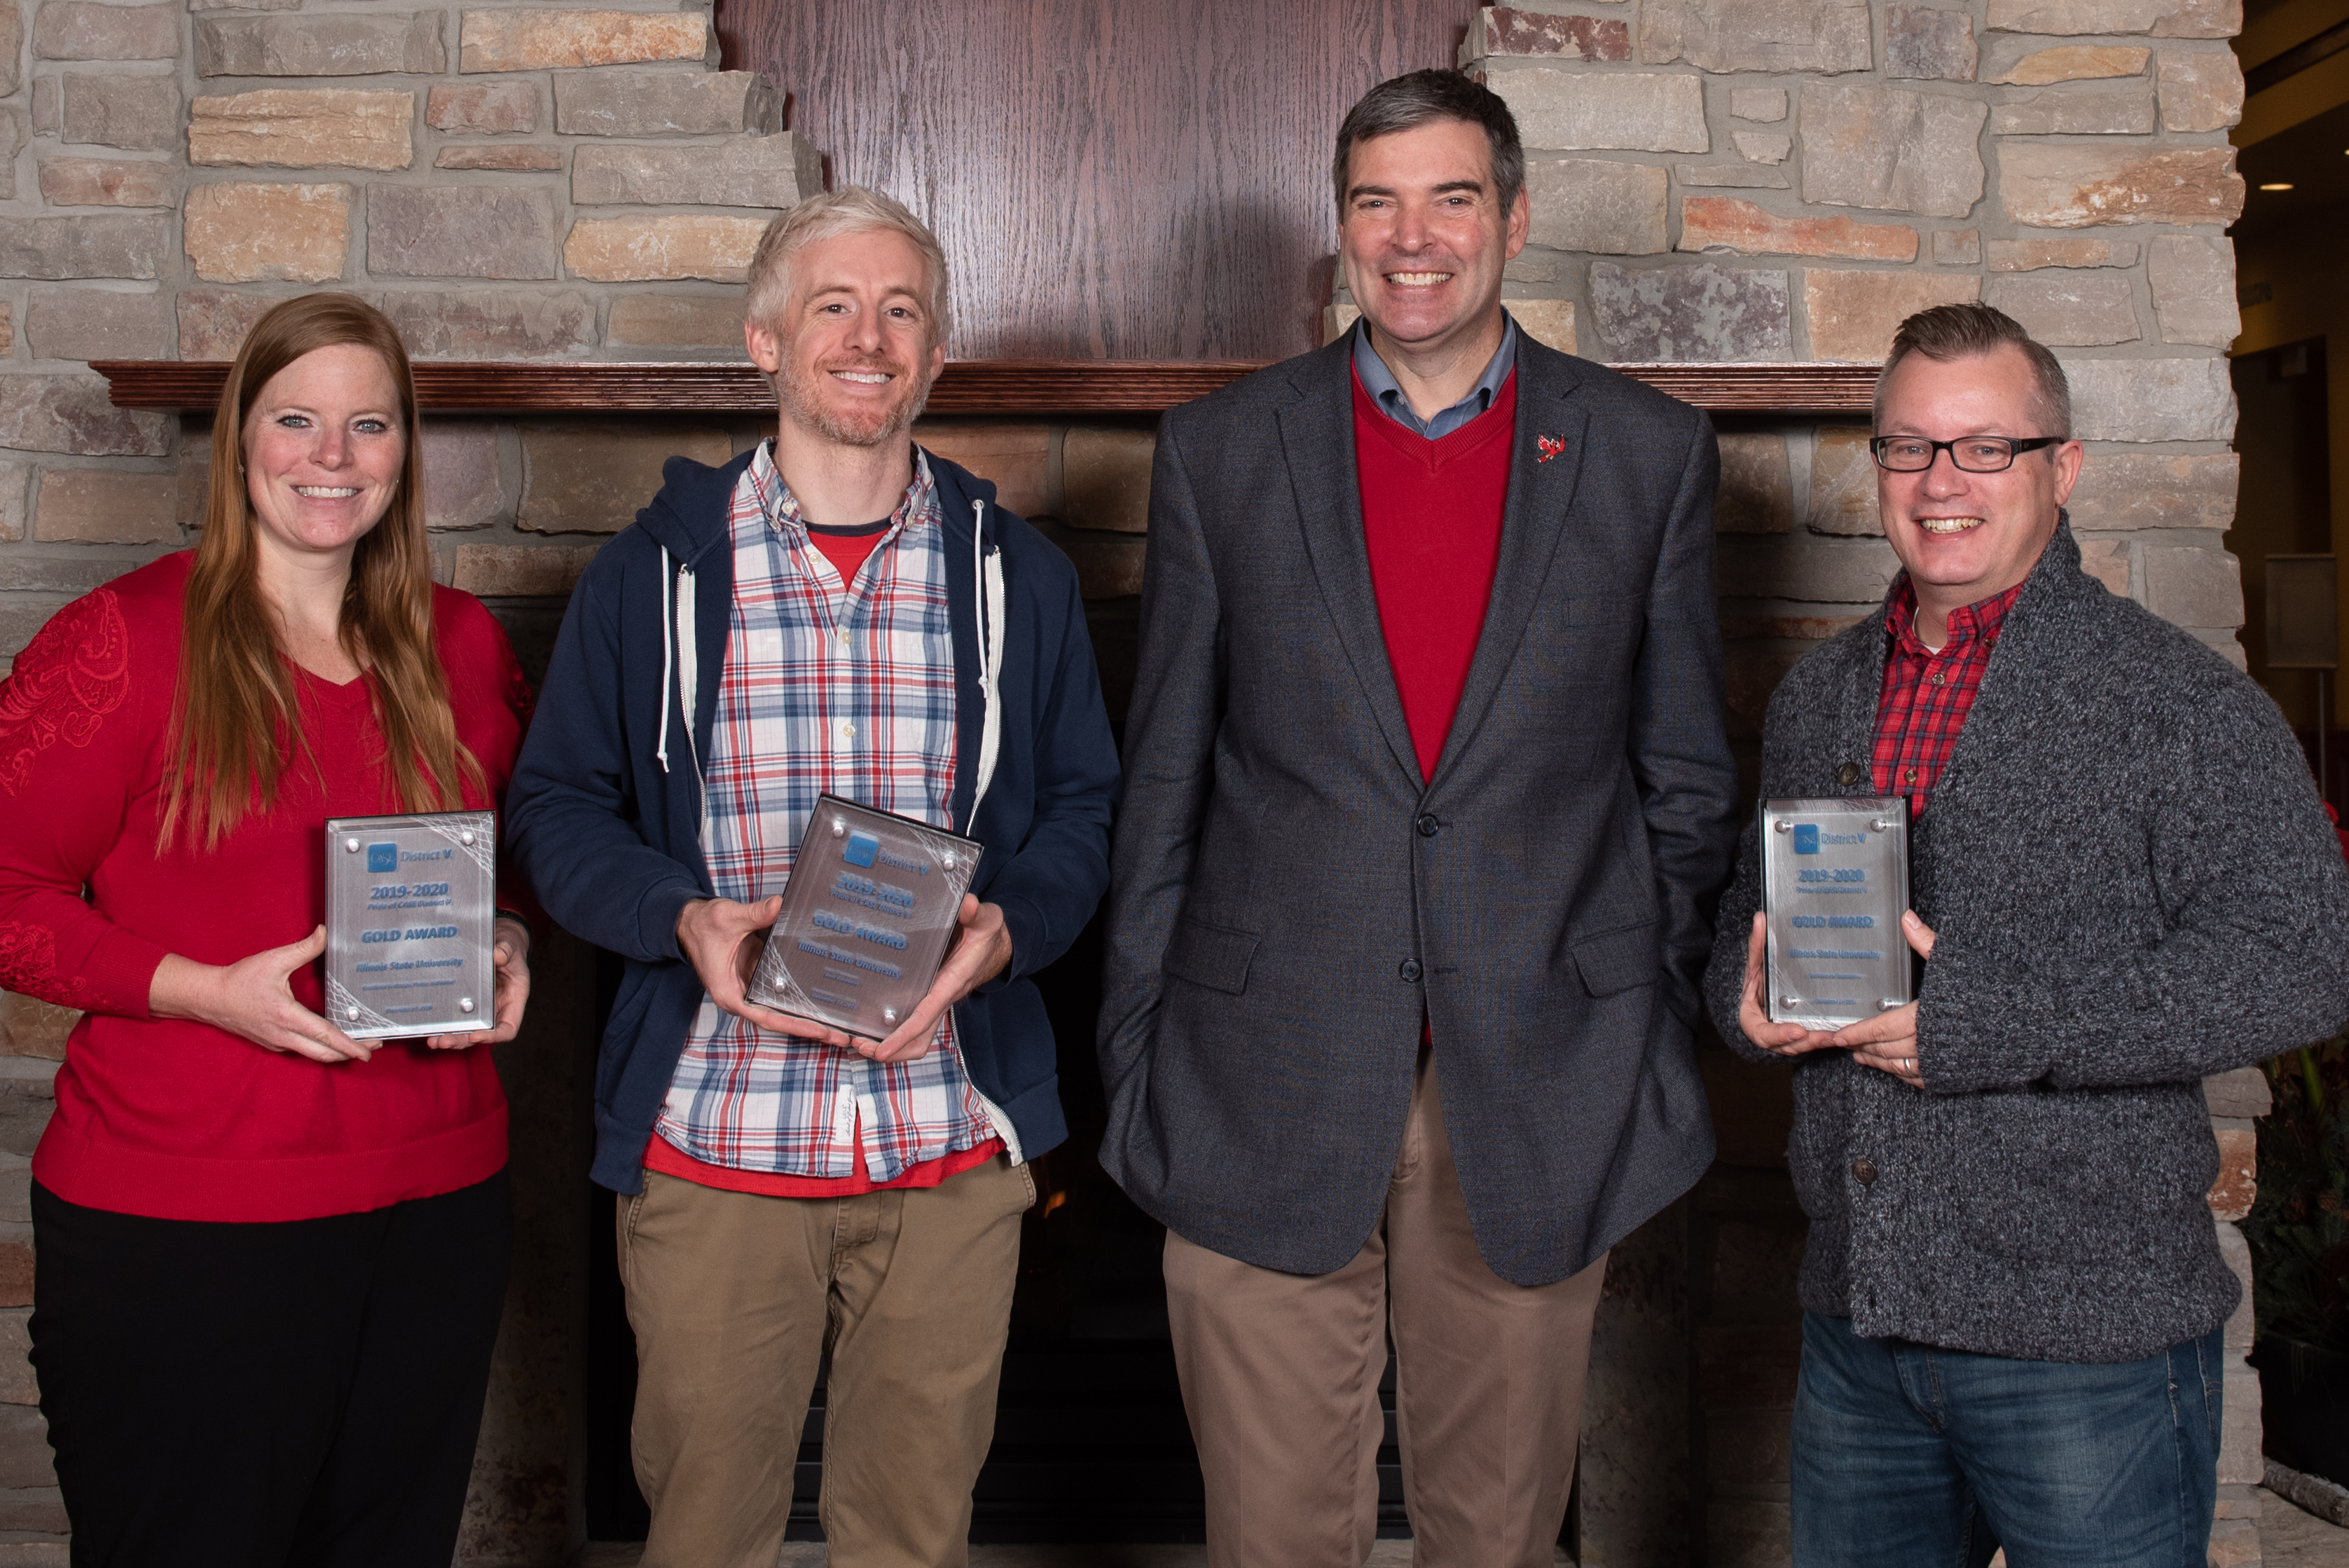 University Marketing and Communications staff display the gold awards they won in the Pride of CASE V competition: senior university photographer Lyndsie Schlink, graphic designer Evan Walles, Executive Director Brian Beam, and graphic designer Sean Thornton.